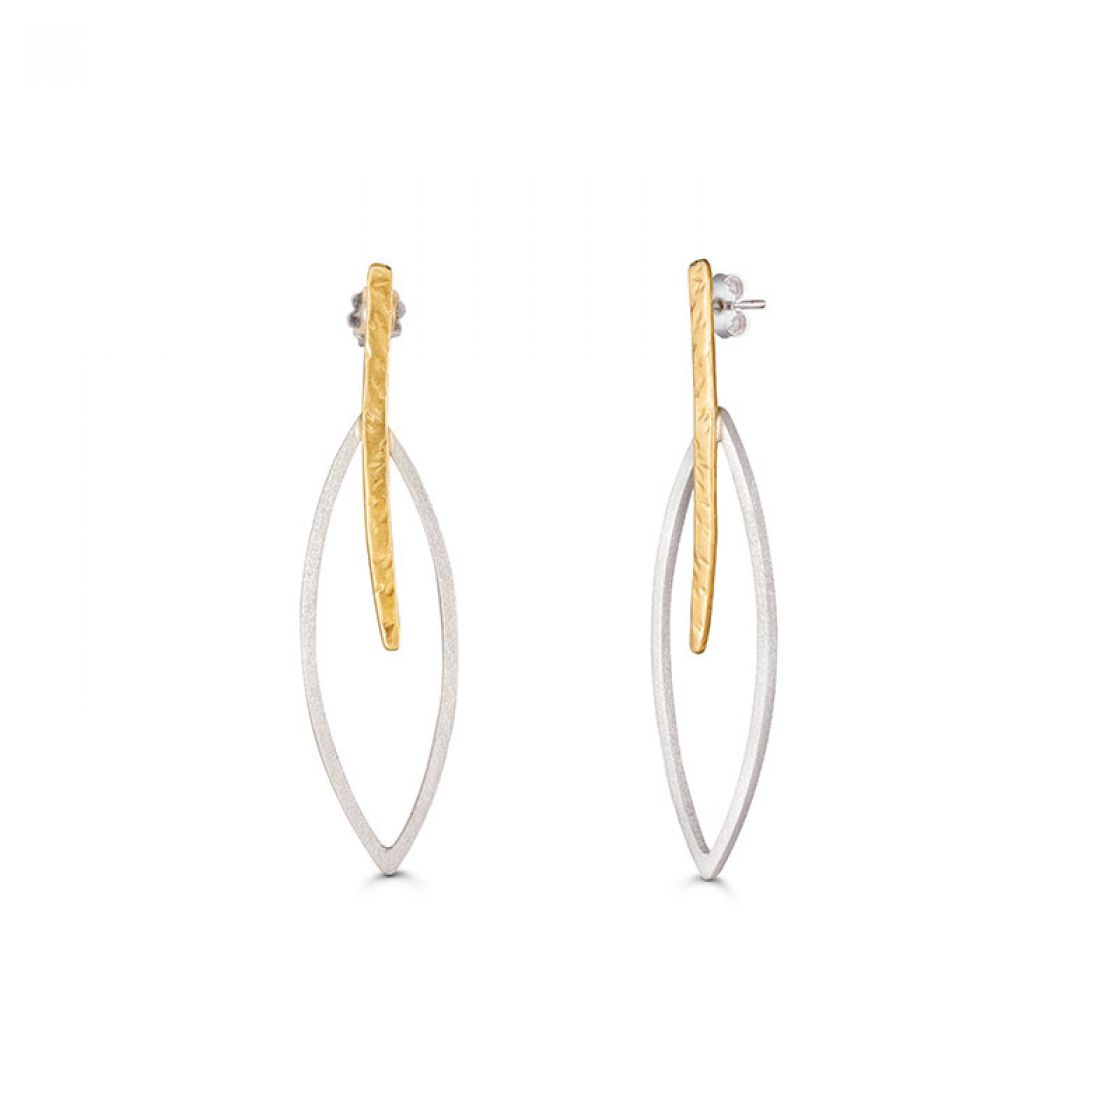 Delicate open leaf silver earrings accented with a gold center.